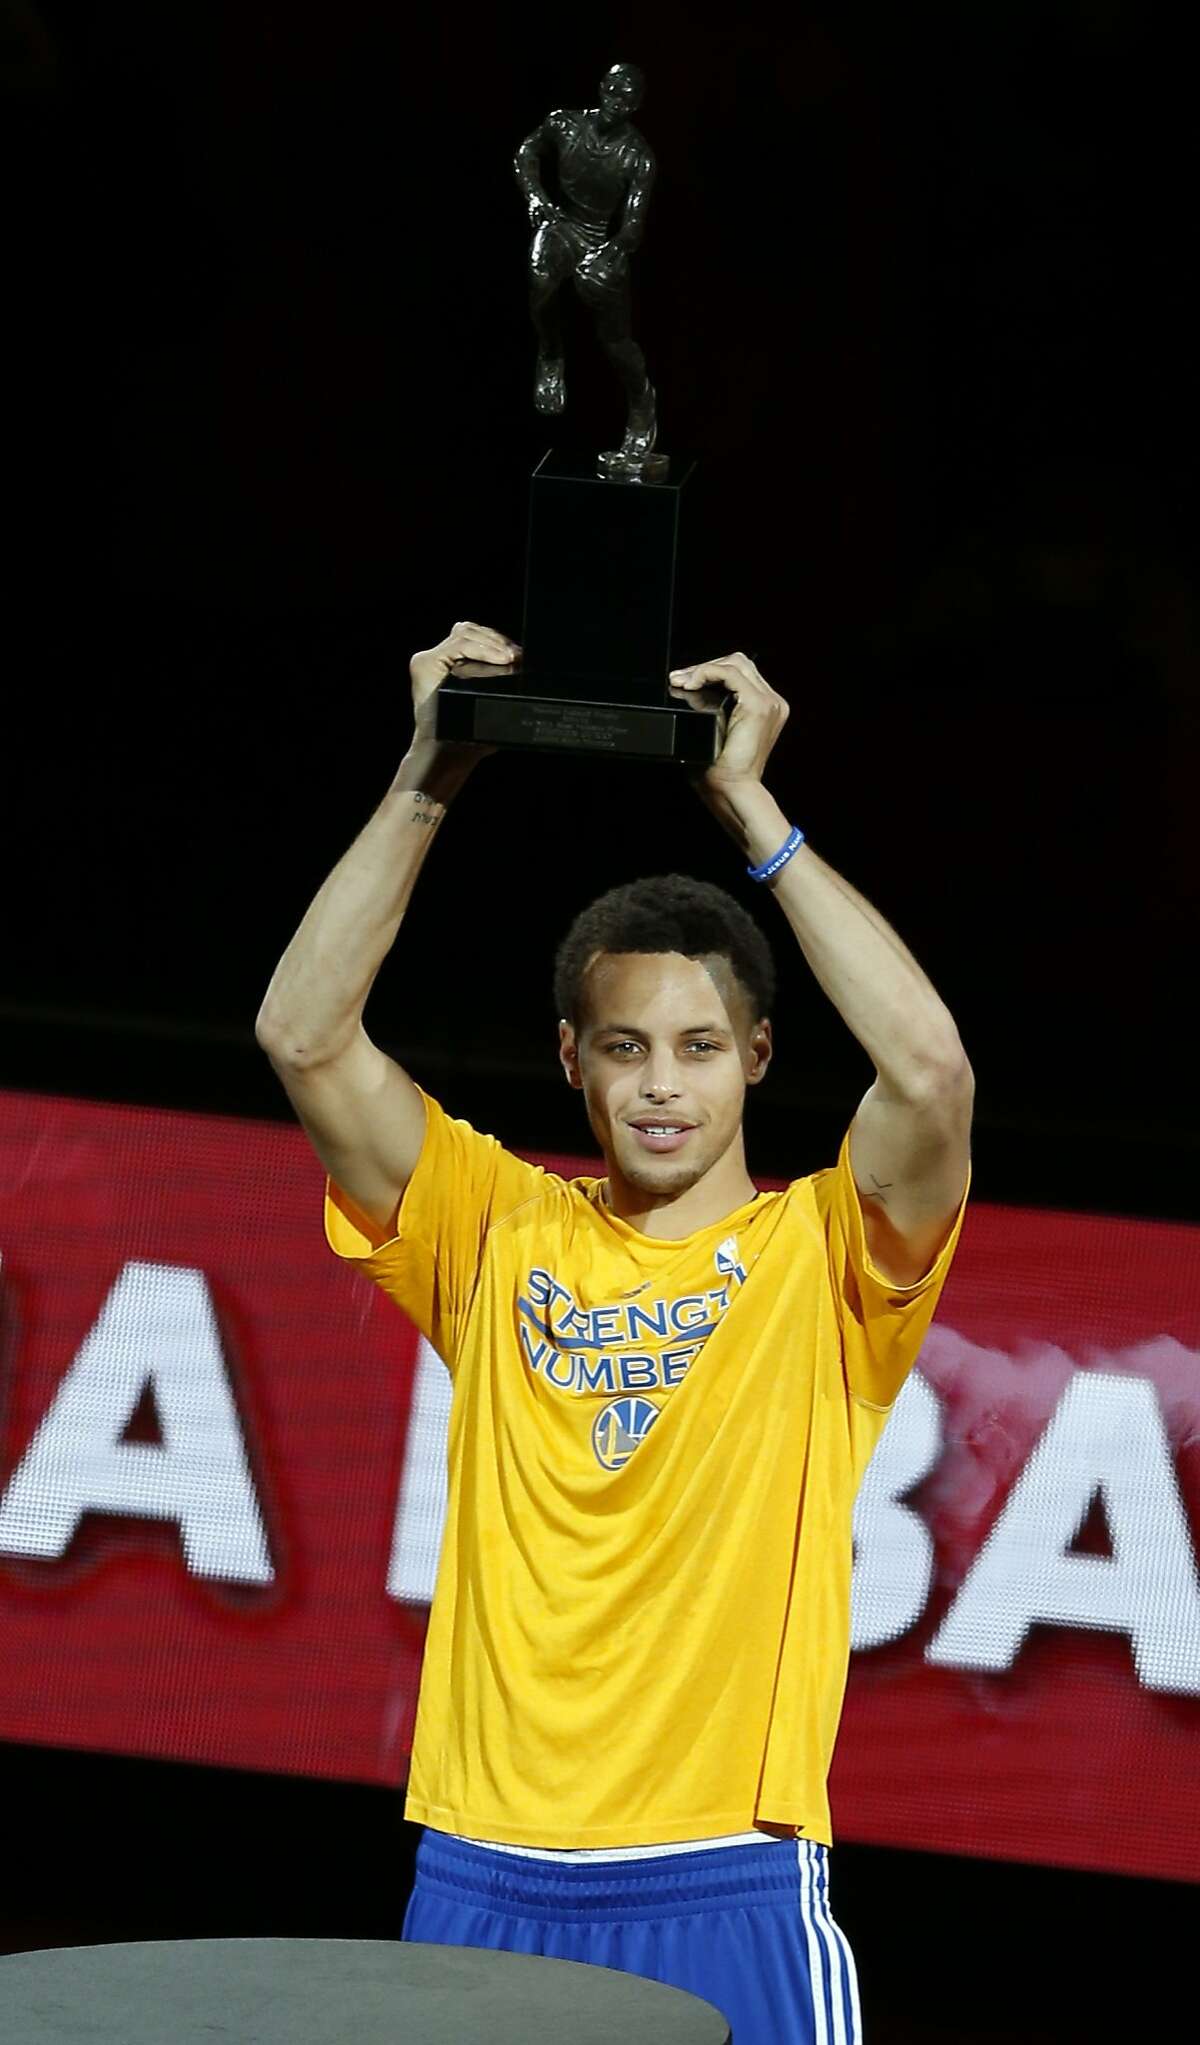 Golden State Warriors' Stephen Curry holds up NBA MVP trophy before playing Memphis Grizzlies during Game 2 of NBA Playoffs' Western Conference Semifinals at Oracle Arena in Oakland, Calif., on Tuesday, May 5, 2015.